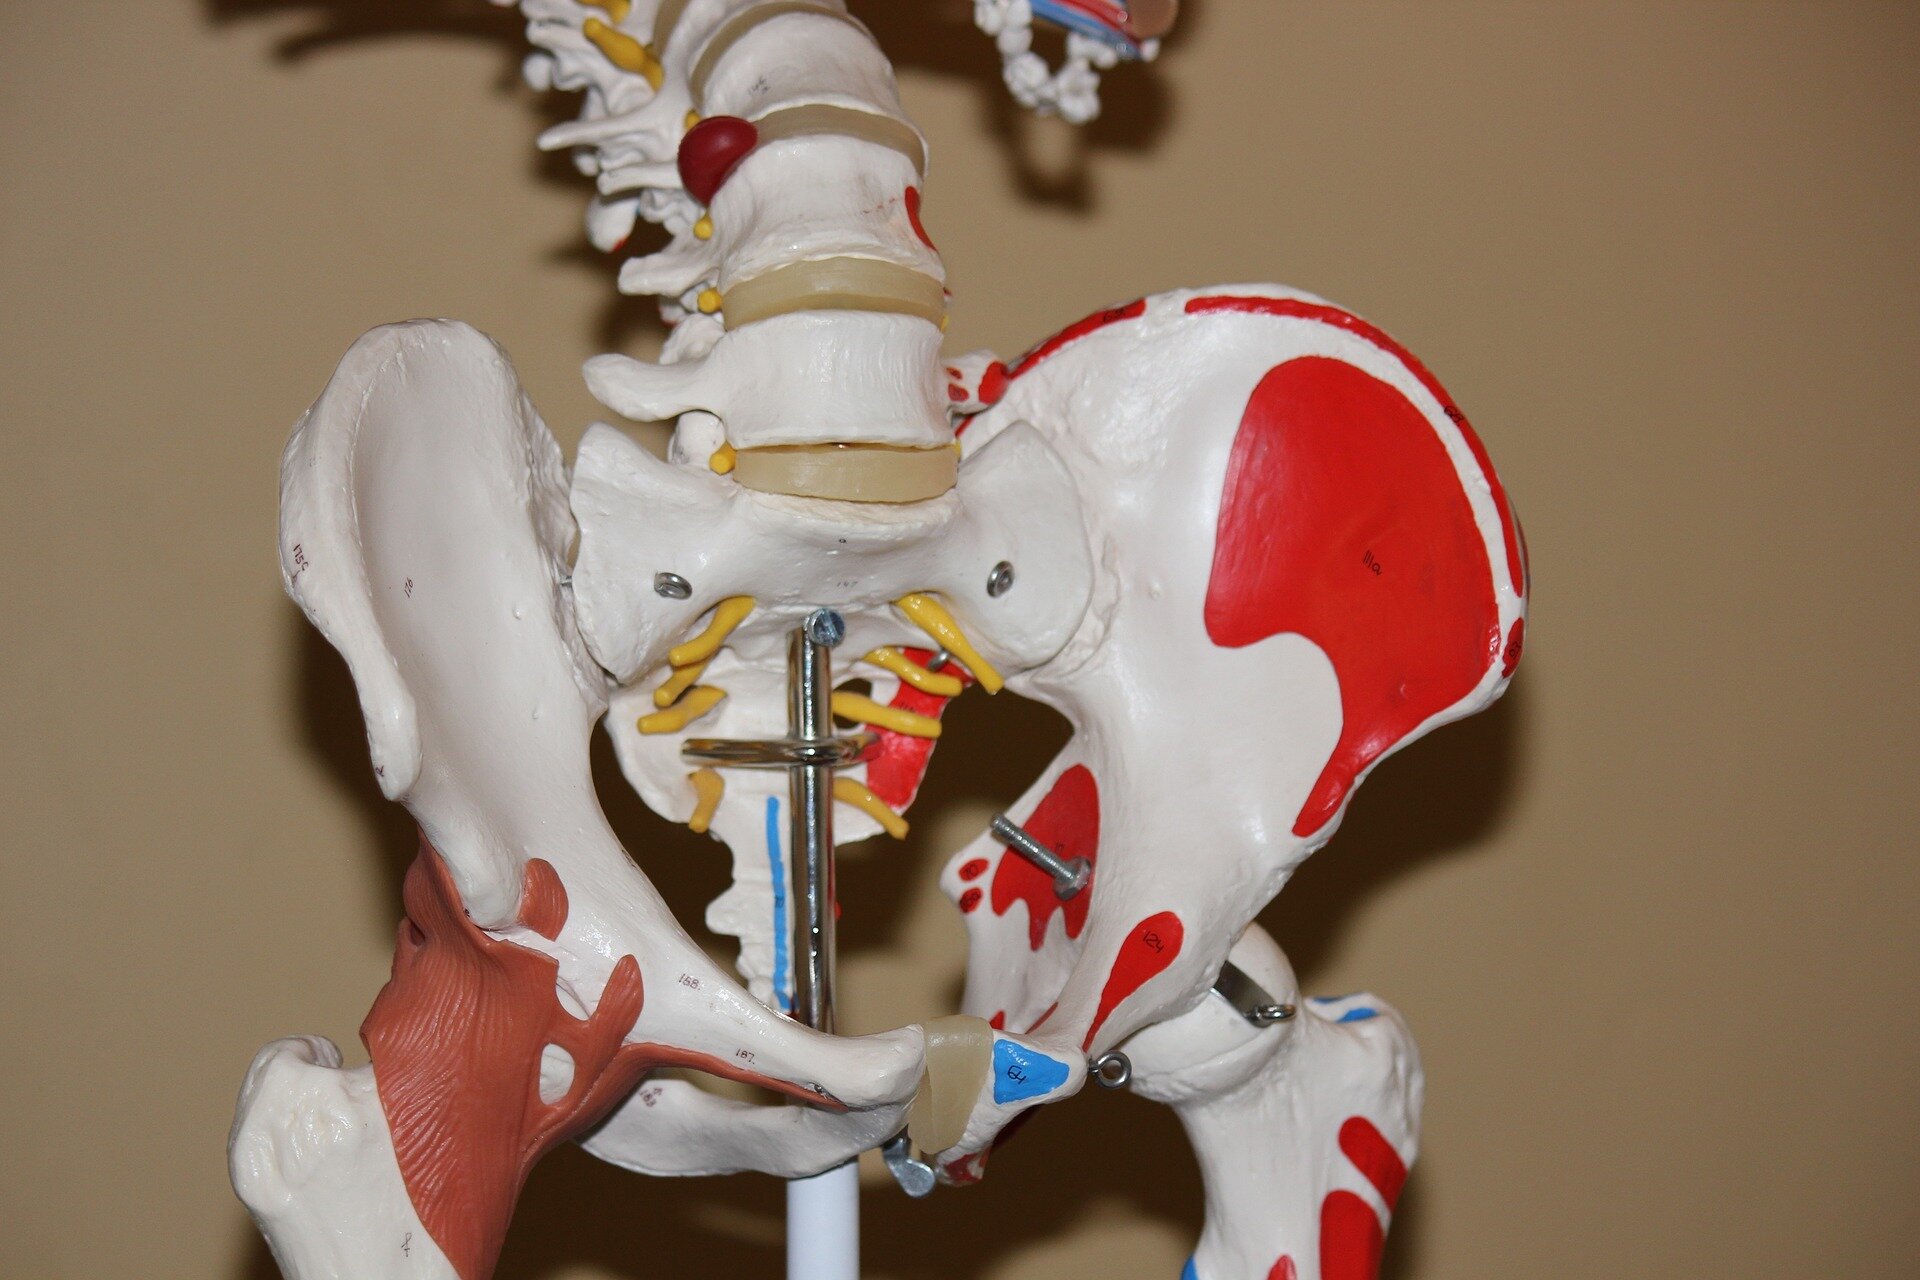 New study suggests robotic surgery may lower risk for hip replacement complications